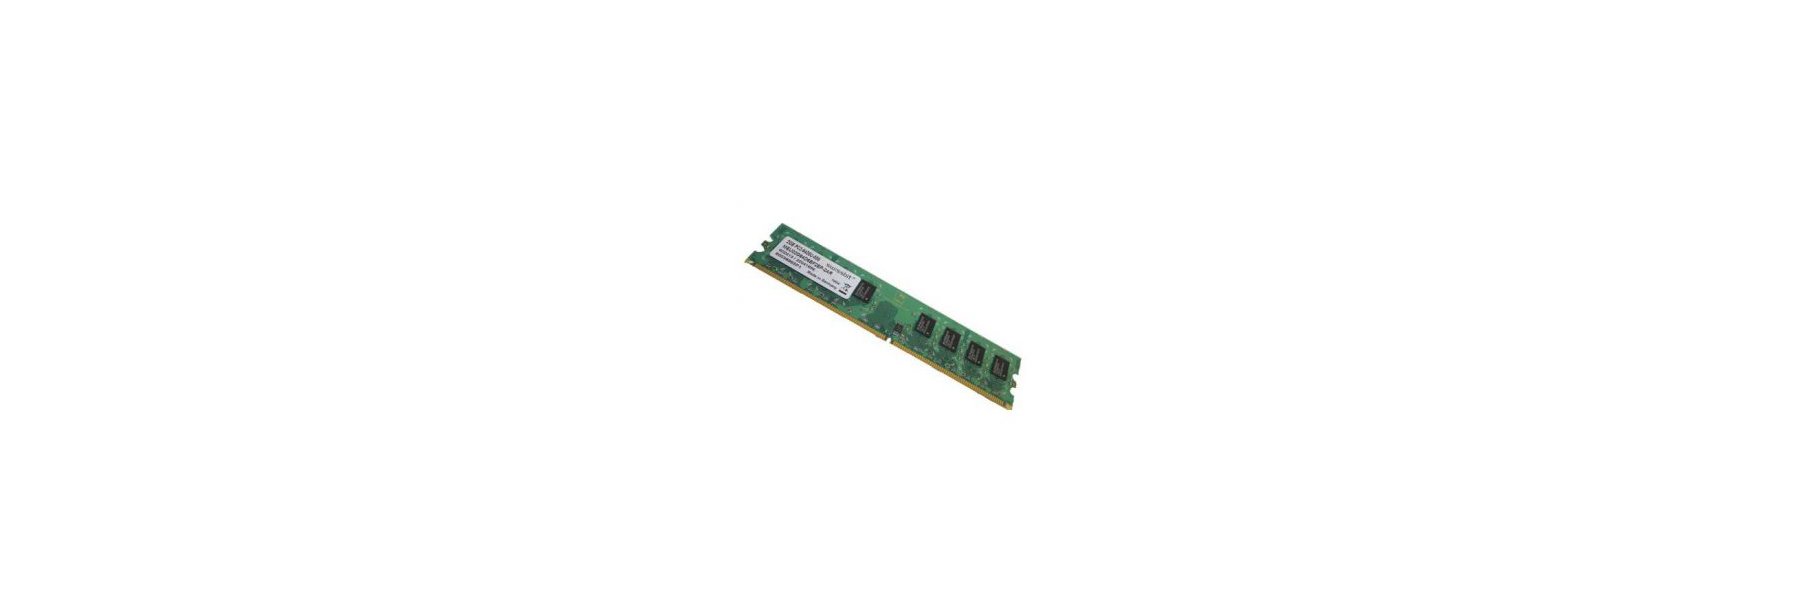 PC3-14900S / SO-DIMM